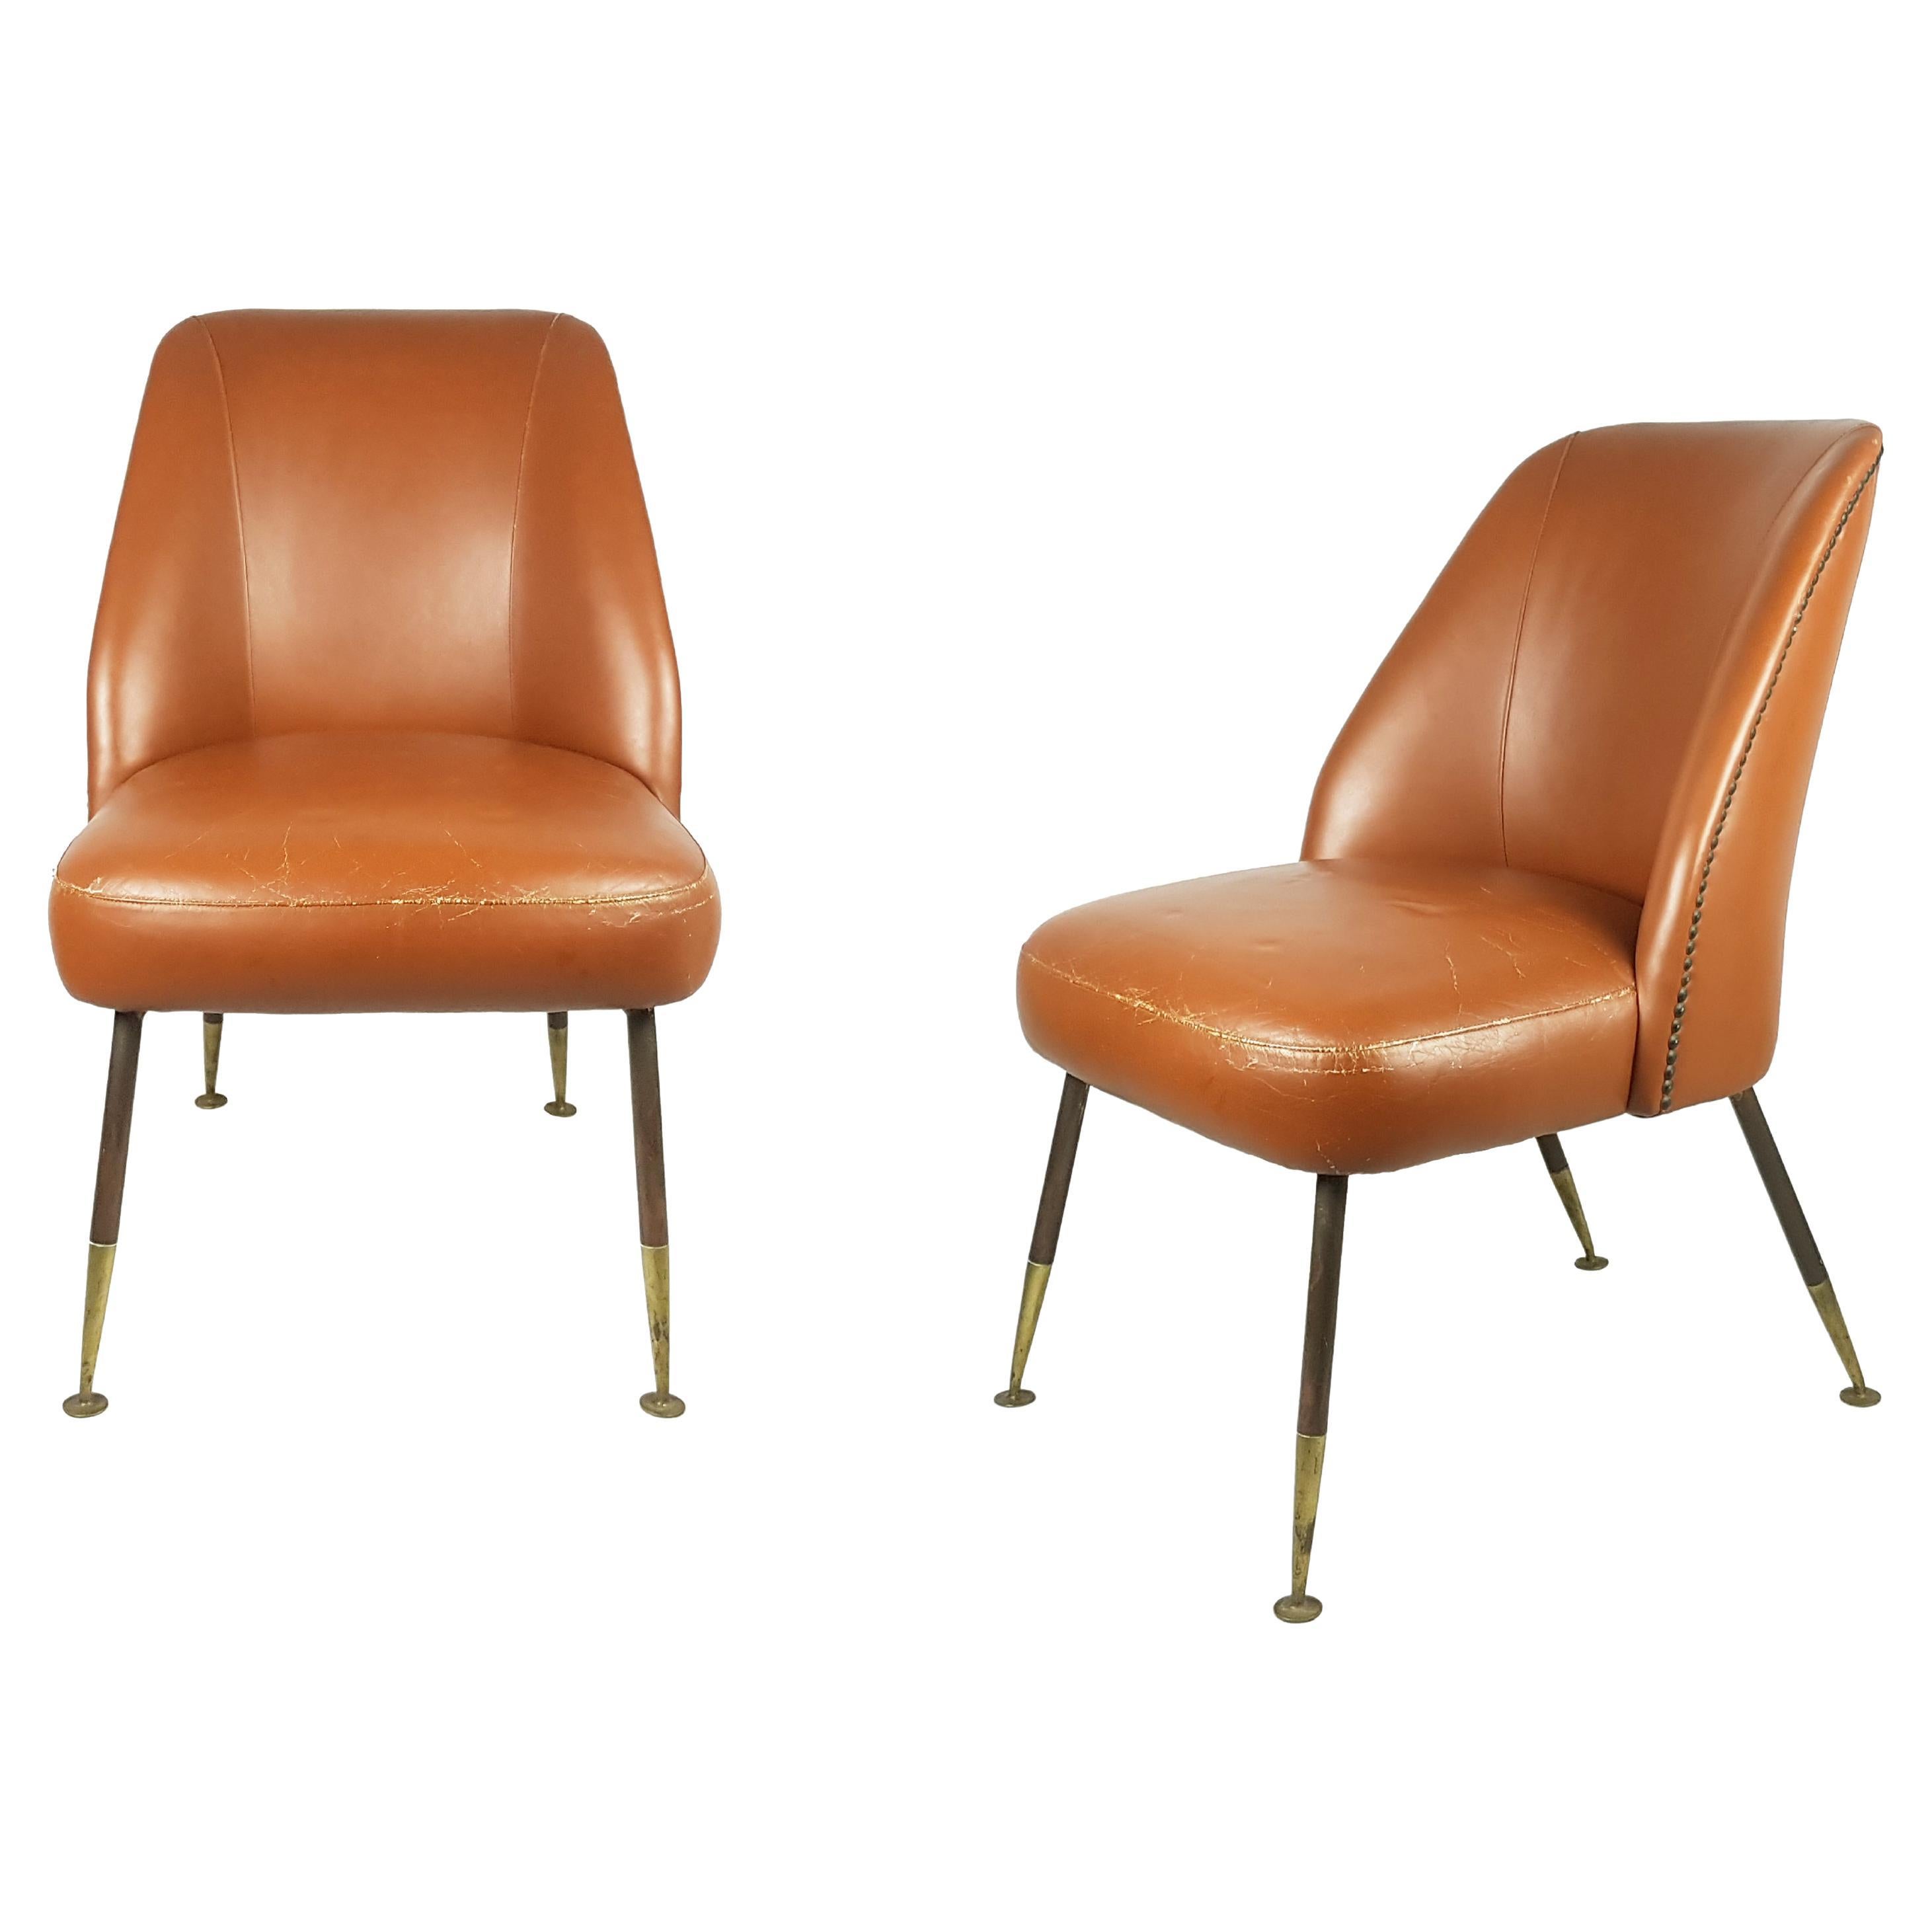 Brown Leather & Brass "Campanula" Chairs by C. Pagani for Arflex, 1952, Set of 2 For Sale